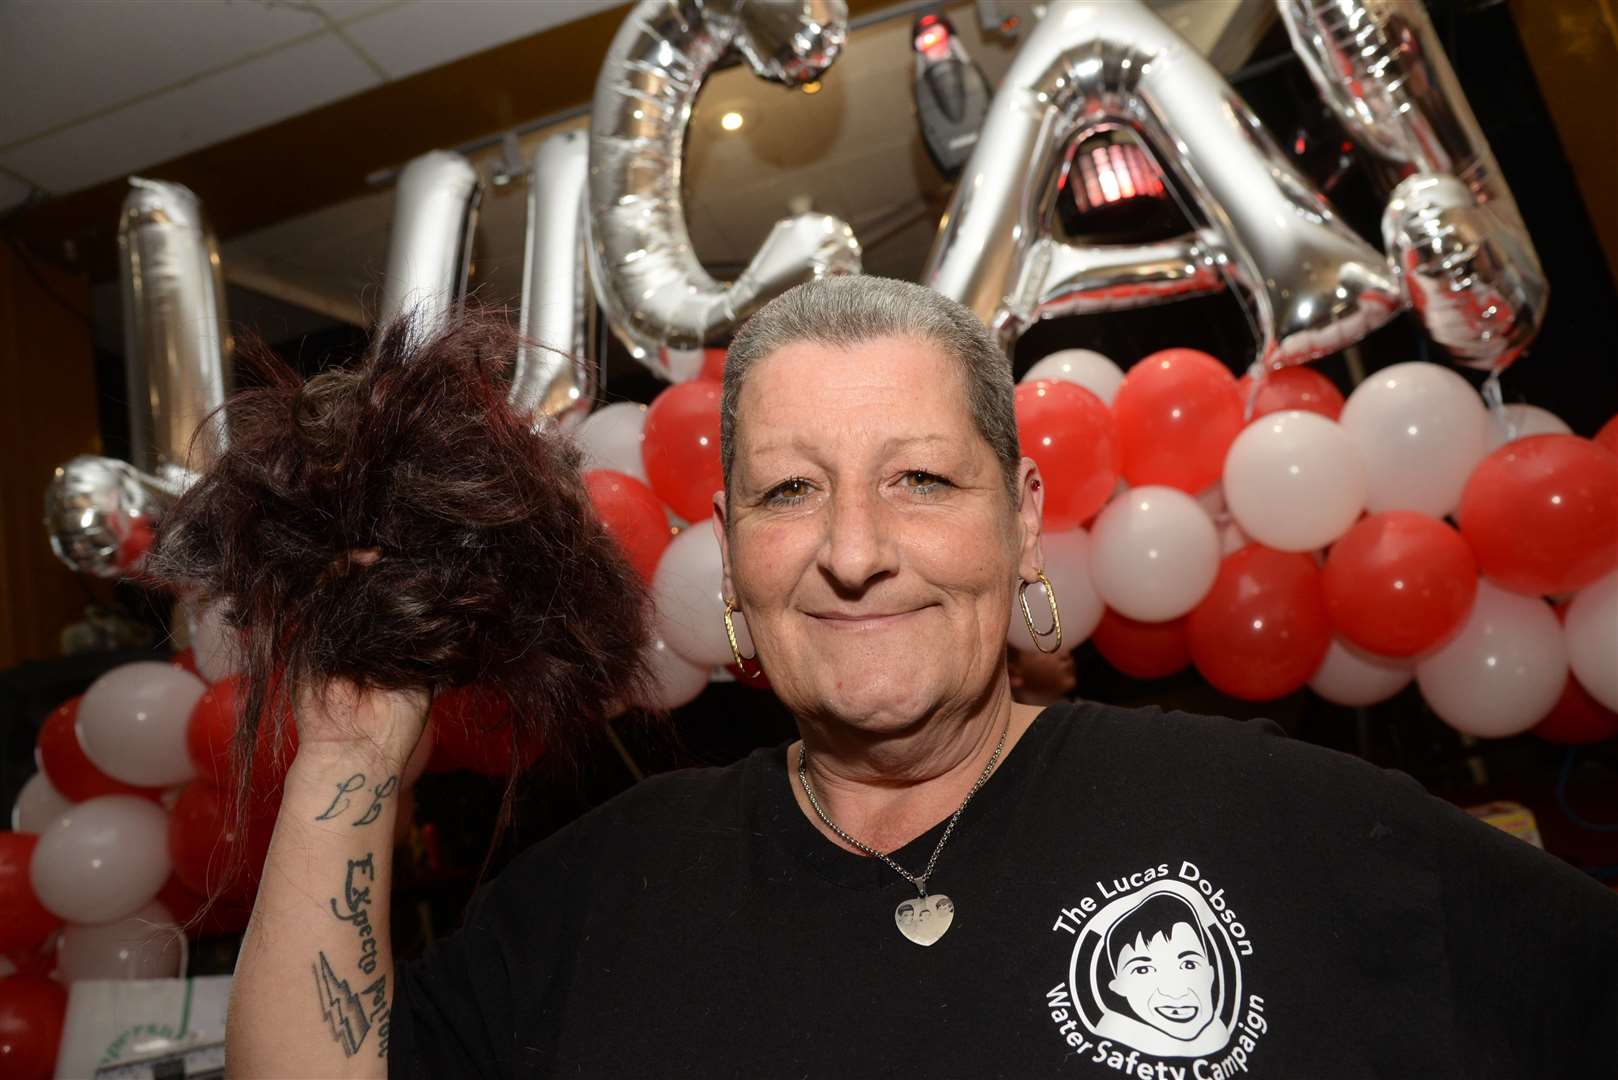 Kim Marsh after her head shave at the fundraiser in memory of Lucas Dobson held at the Deal Welfare Club Picture: Chris Davey